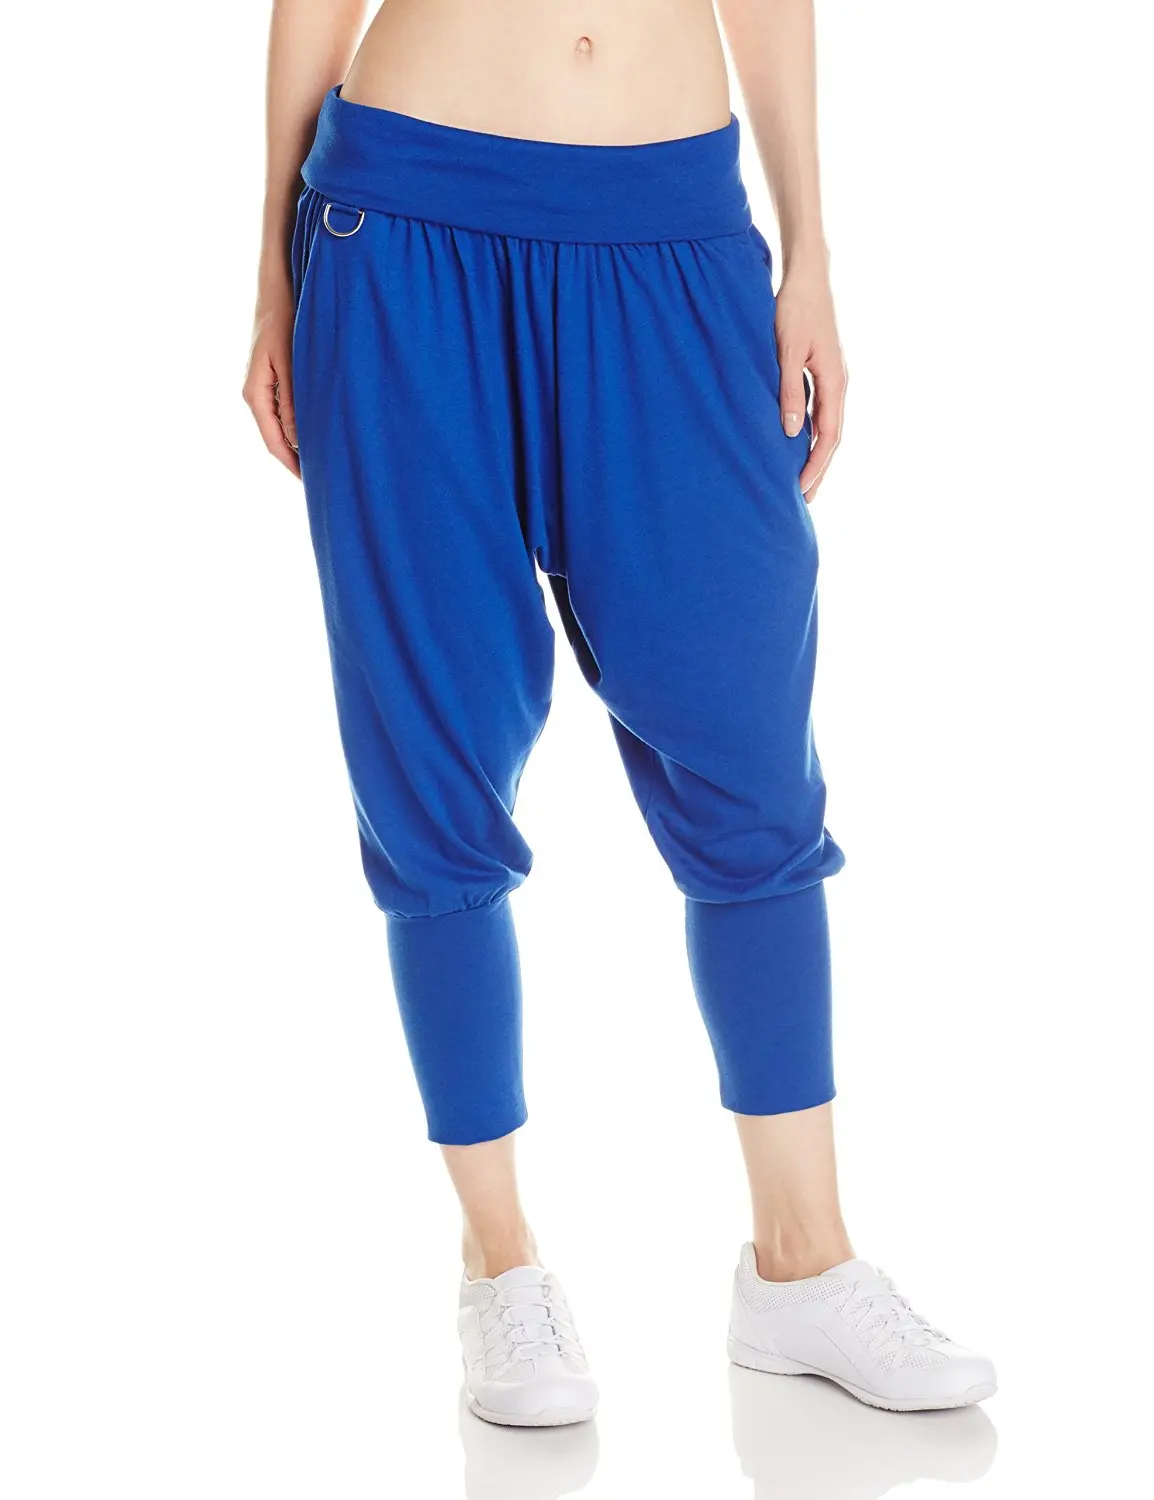 Cheap Zumba Pants, find Zumba Pants deals on line at Alibaba.com